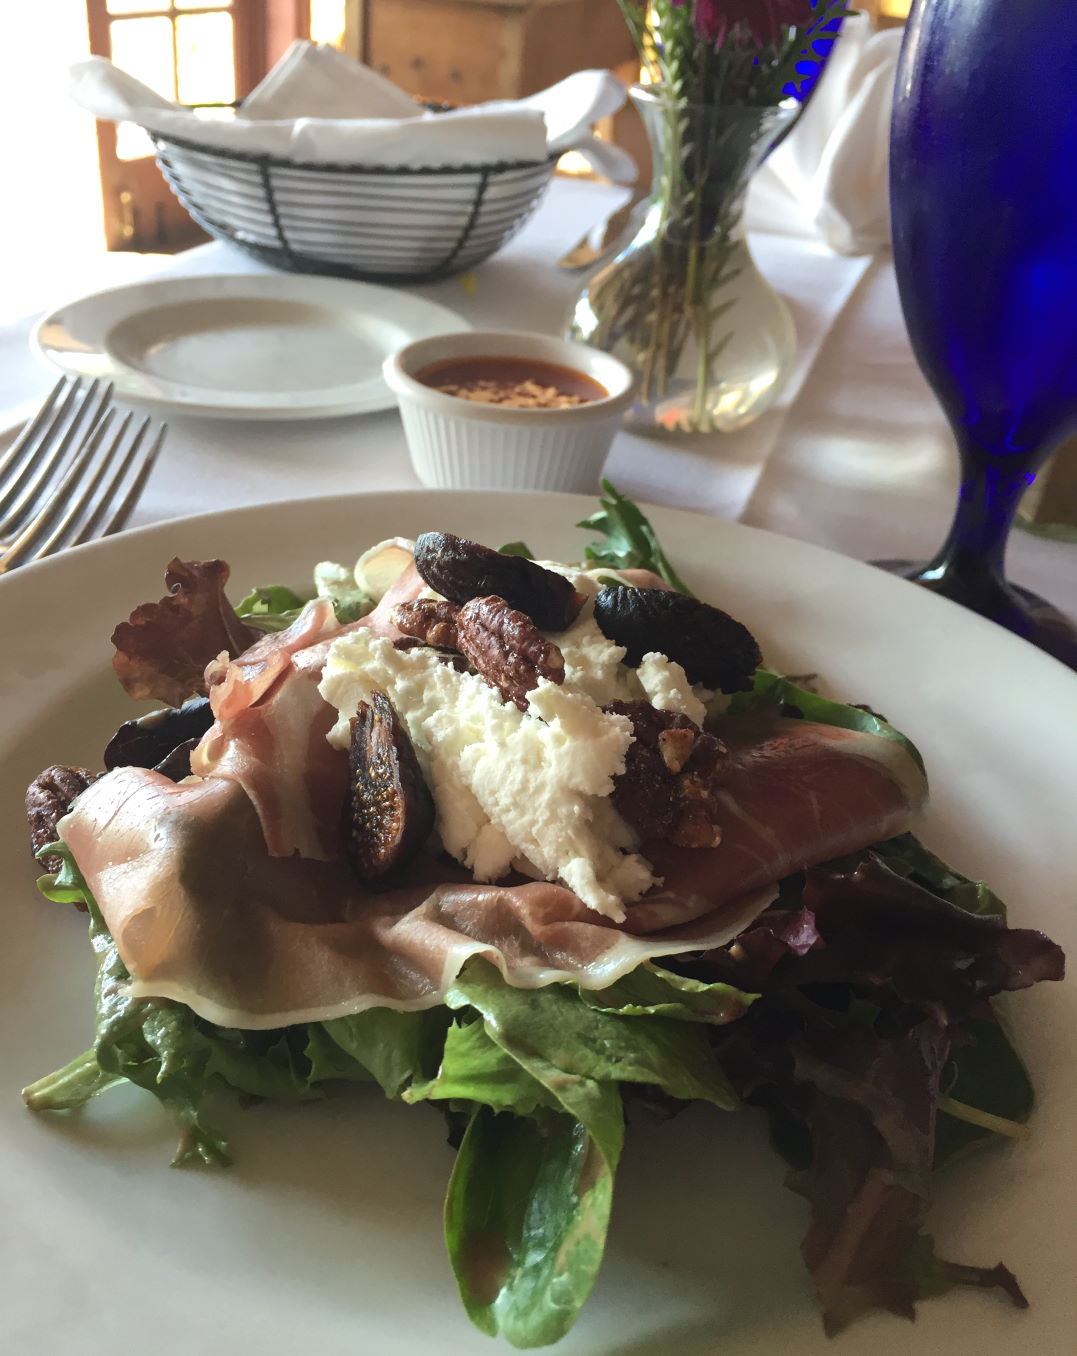 Prosciutto, fig and goat cheese salad at Trattoria Positano, Cardiff-by-the-Sea